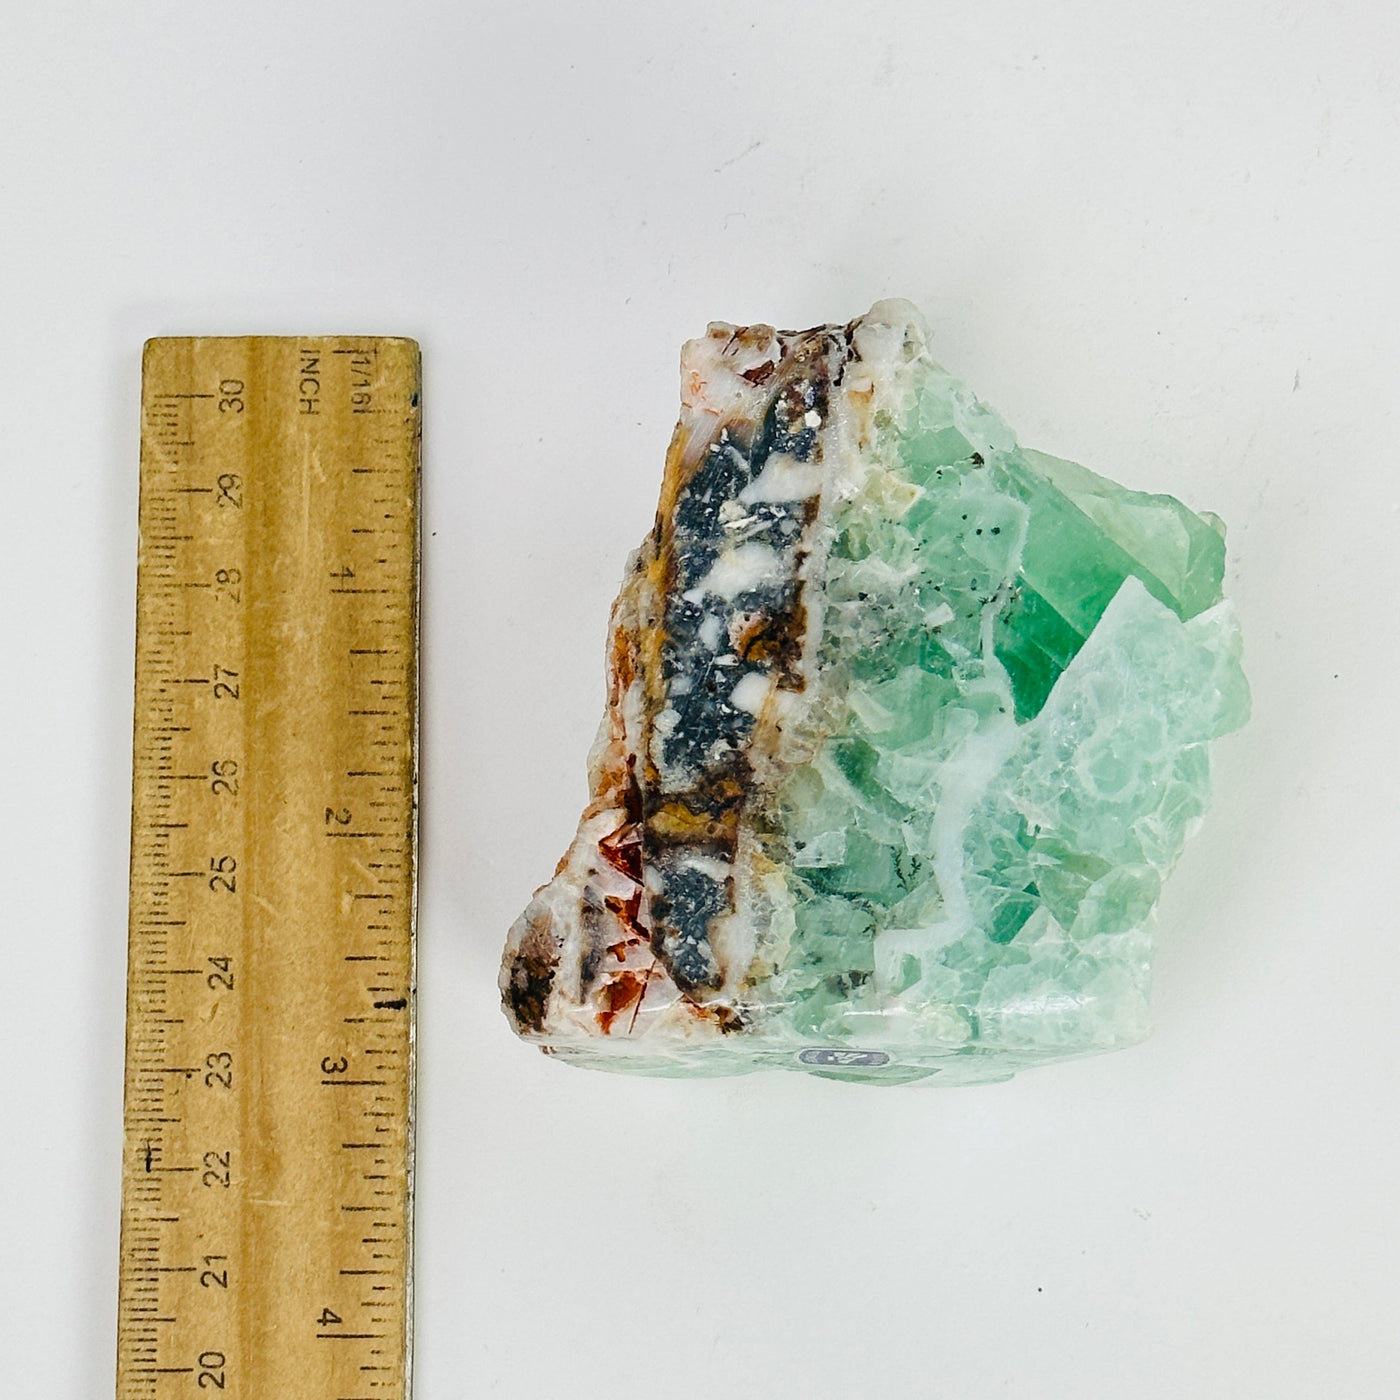 fluorite cut base next to a ruler for size reference